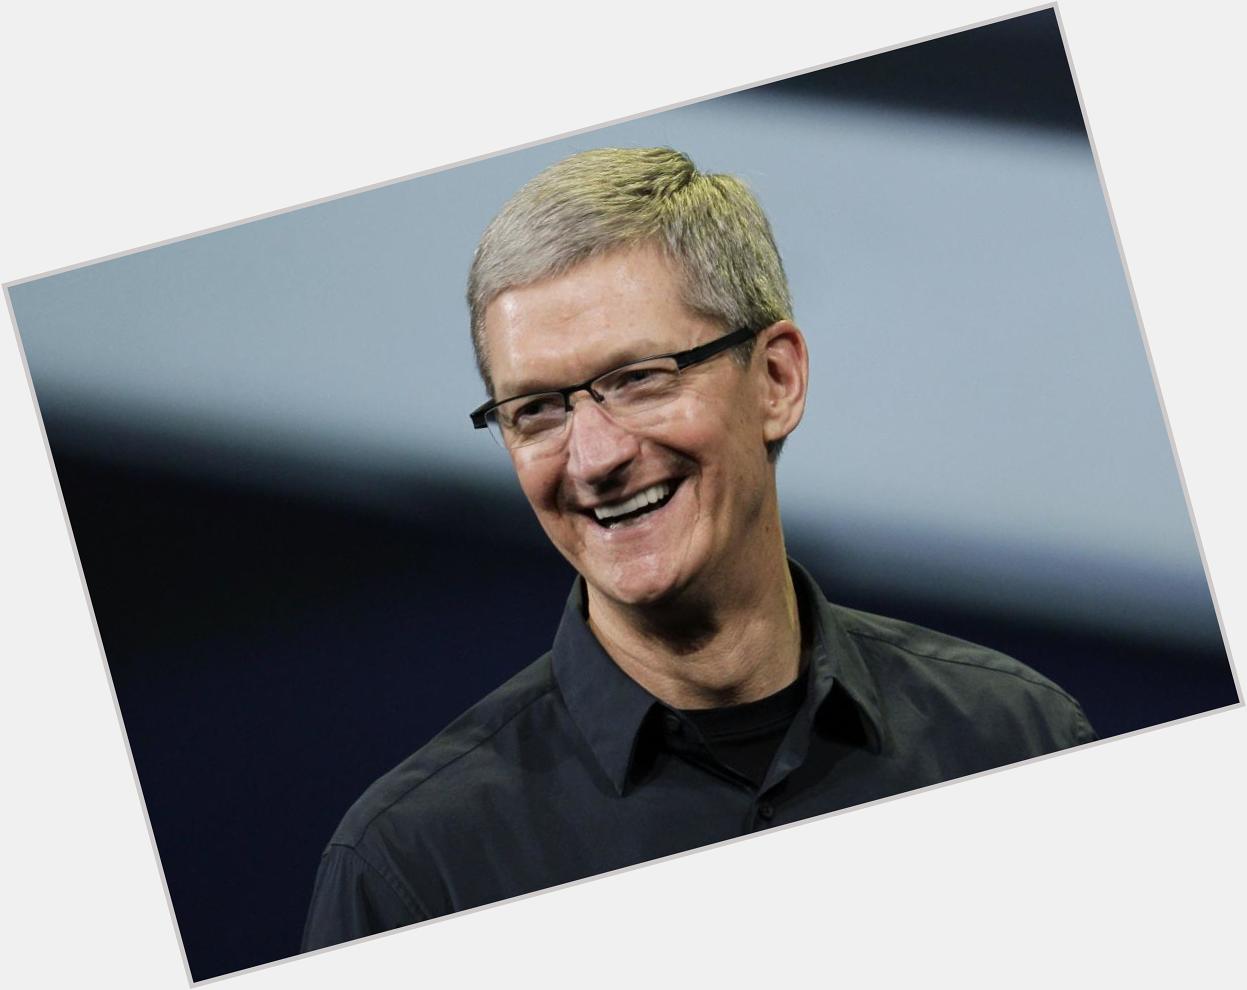 Wishing a happy 55th birthday to Apple CEO Tim Cook who came out publicly a yr ago 